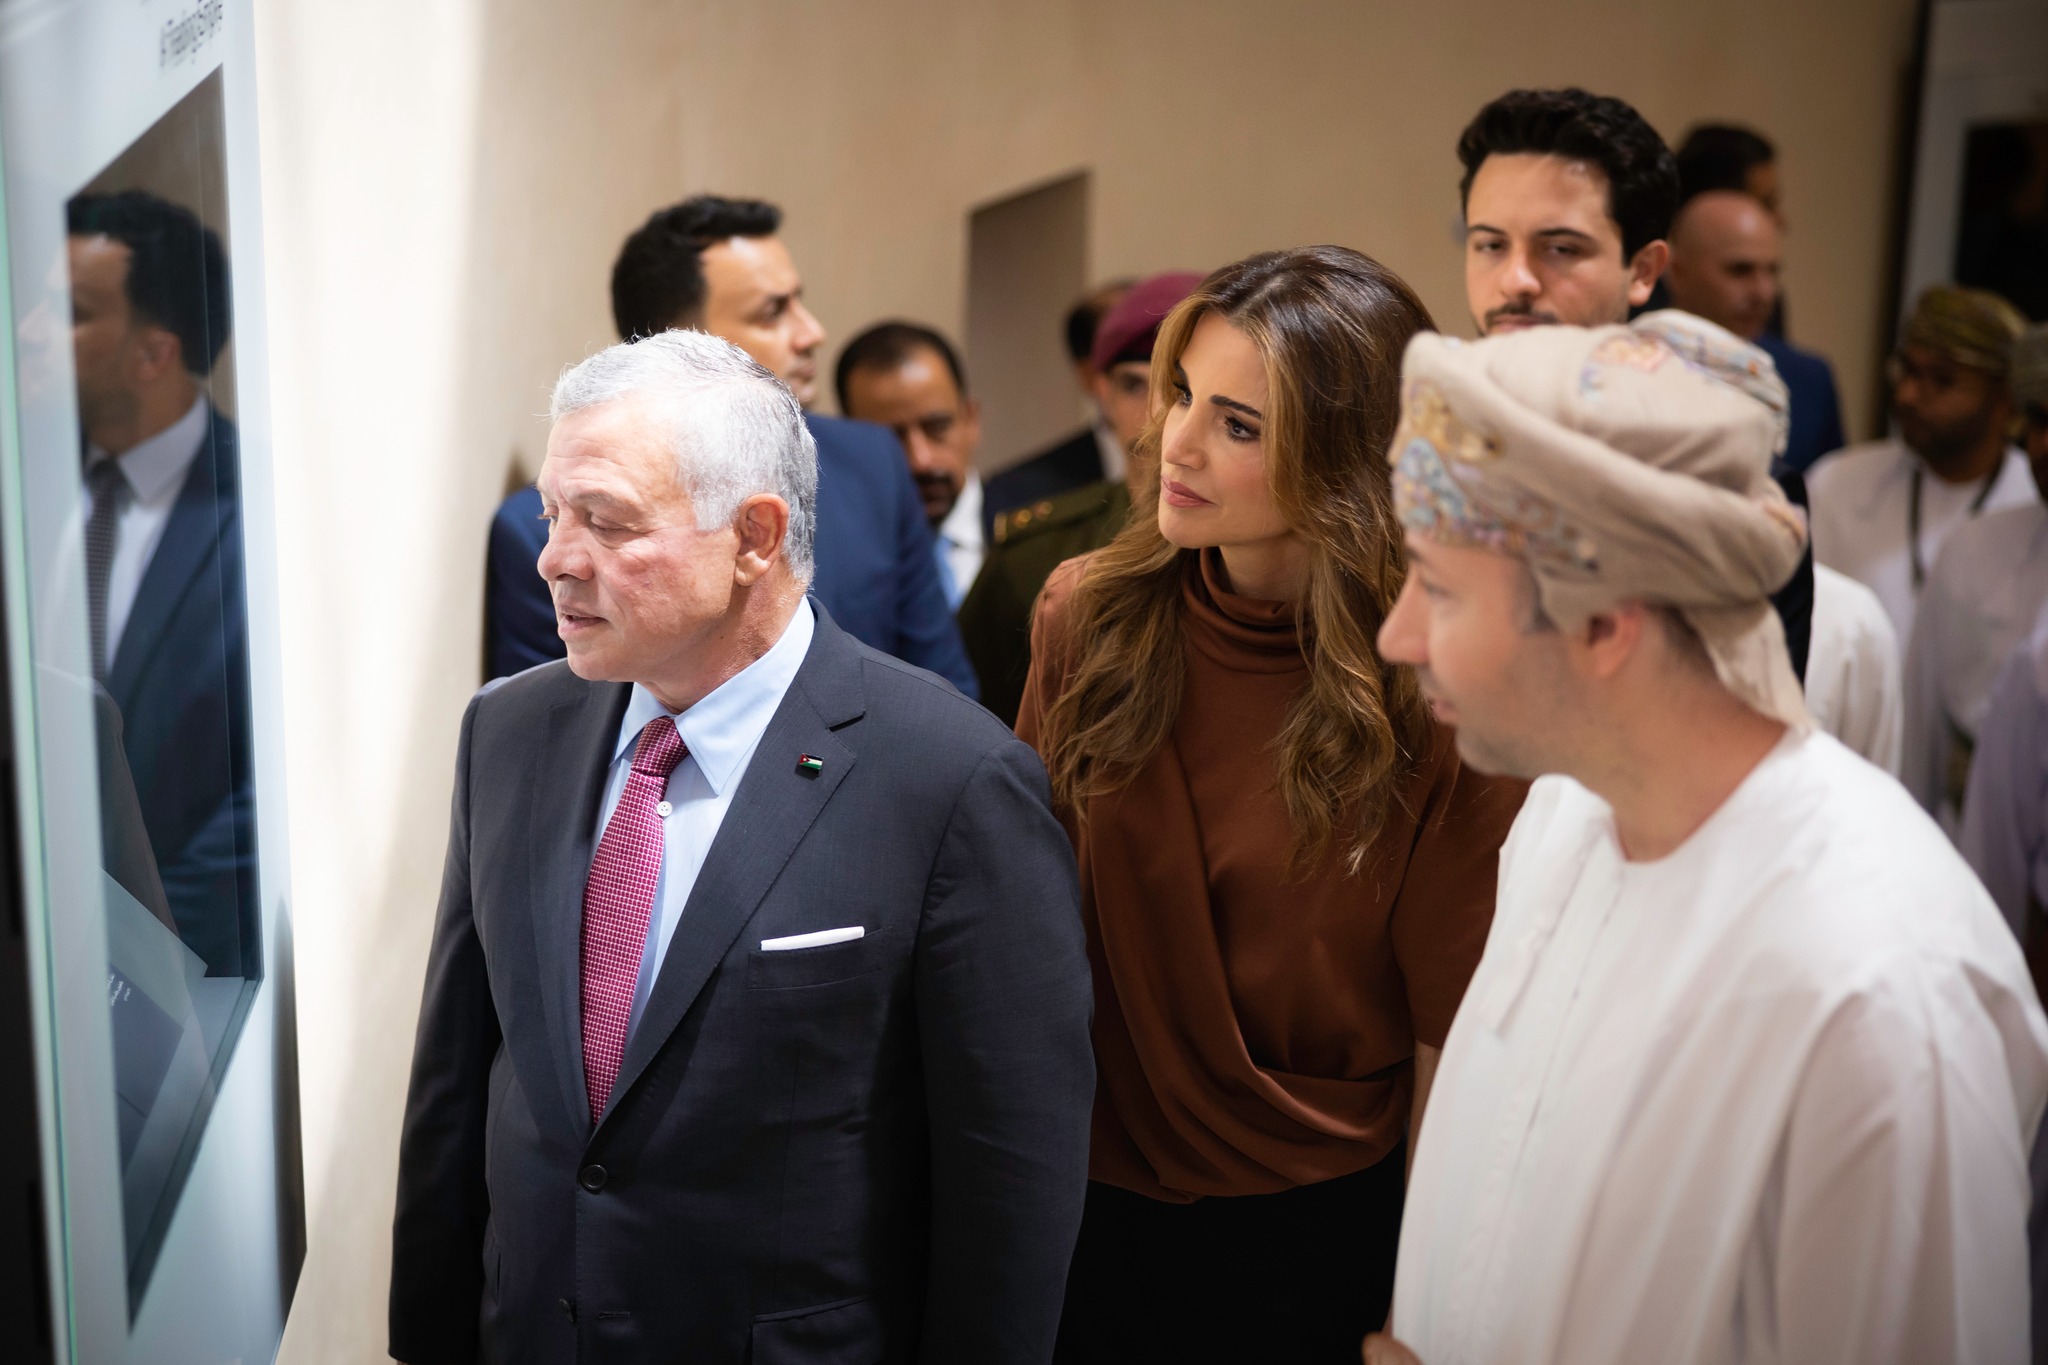 The Jordan royals continued their agenda in Oman and visited National Museum of Oman and the House of Musical Arts at the Royal Opera House in Muscat